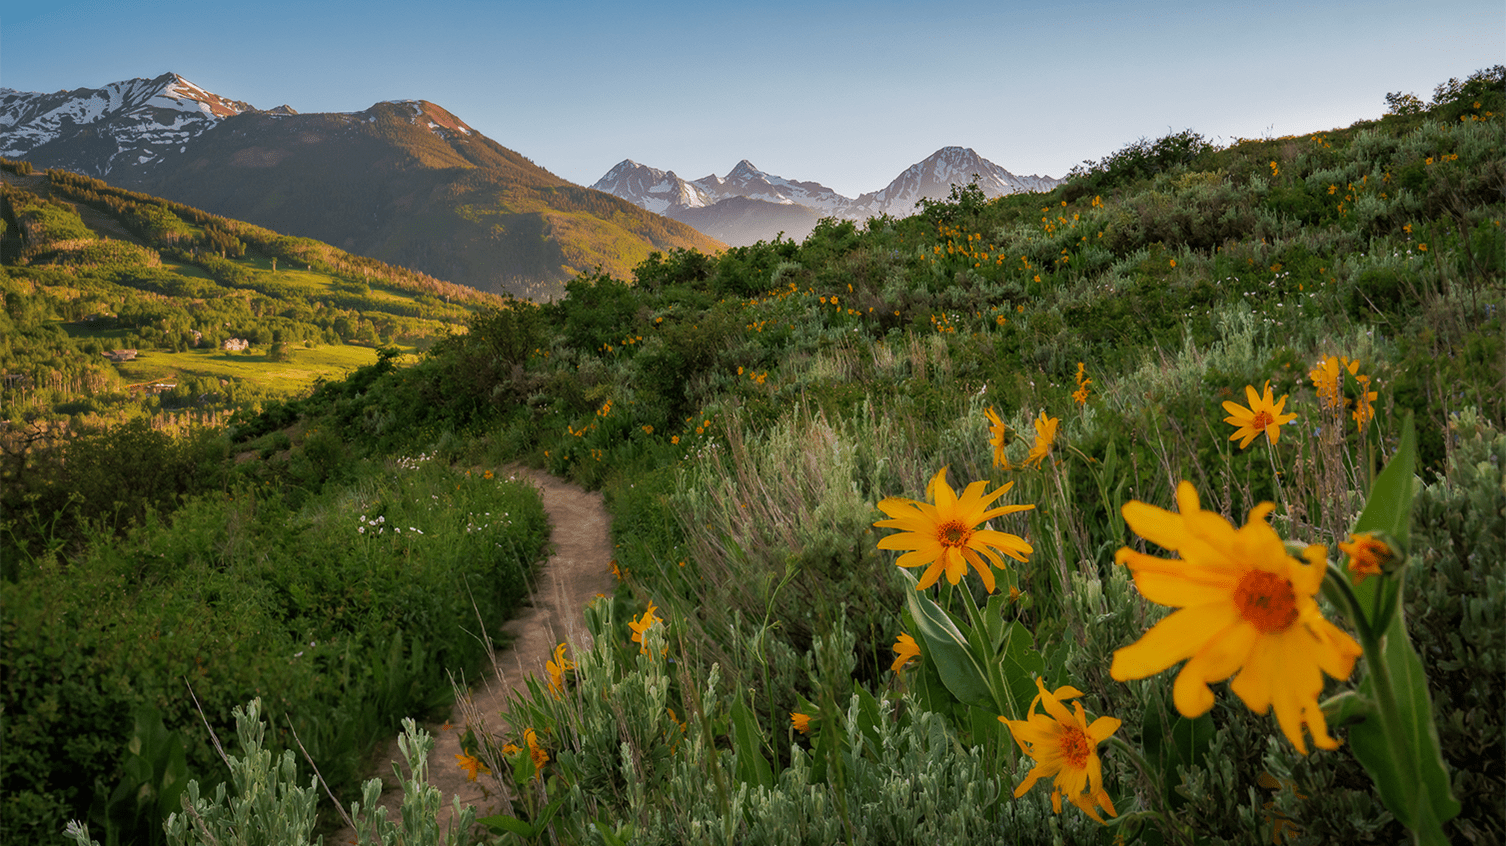 Hiking trail at dusk, with Snowmass Mountain and orange flowers illuminated by the setting sun